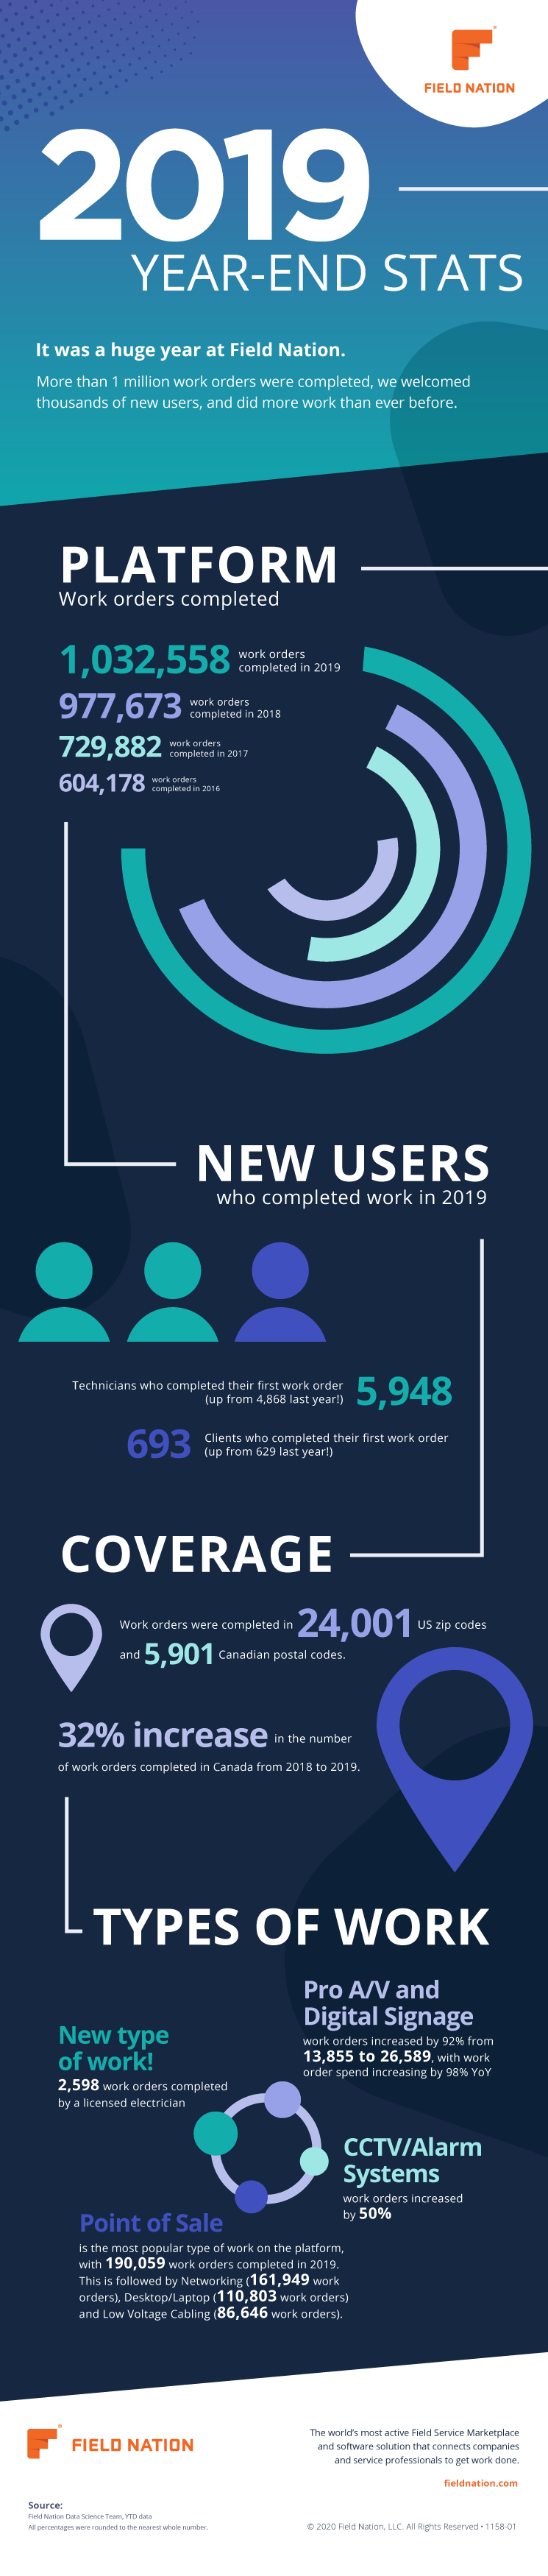 2019 Year End Stats Infographic